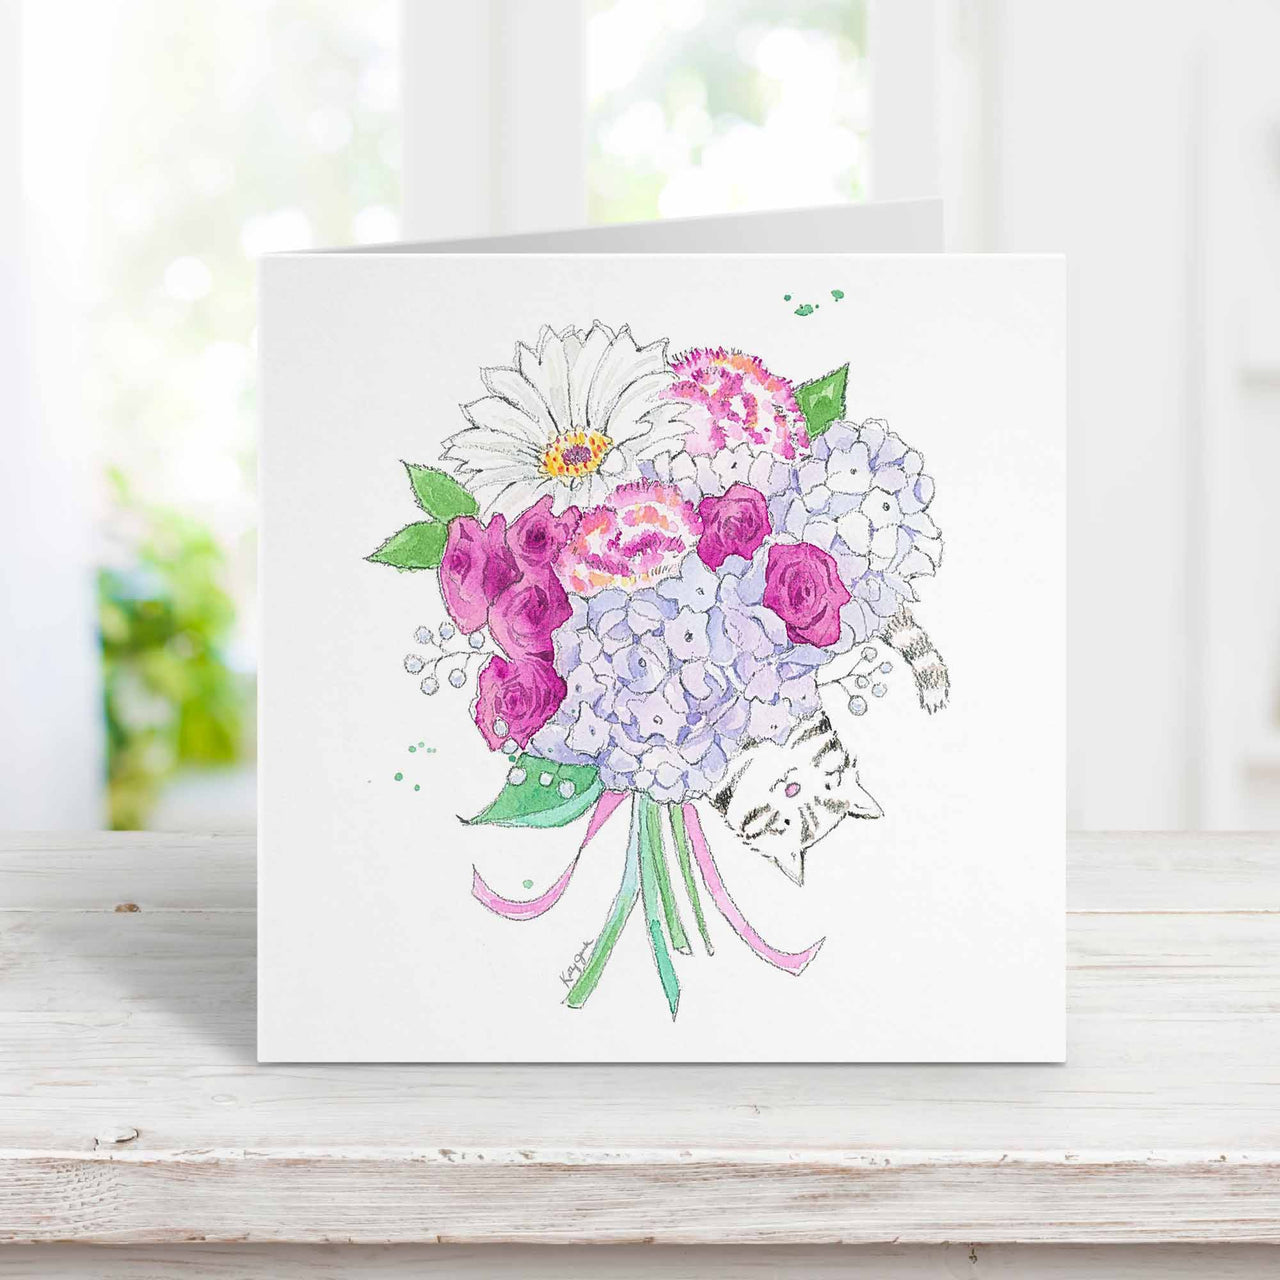 Gray striped cat with purple flowers card